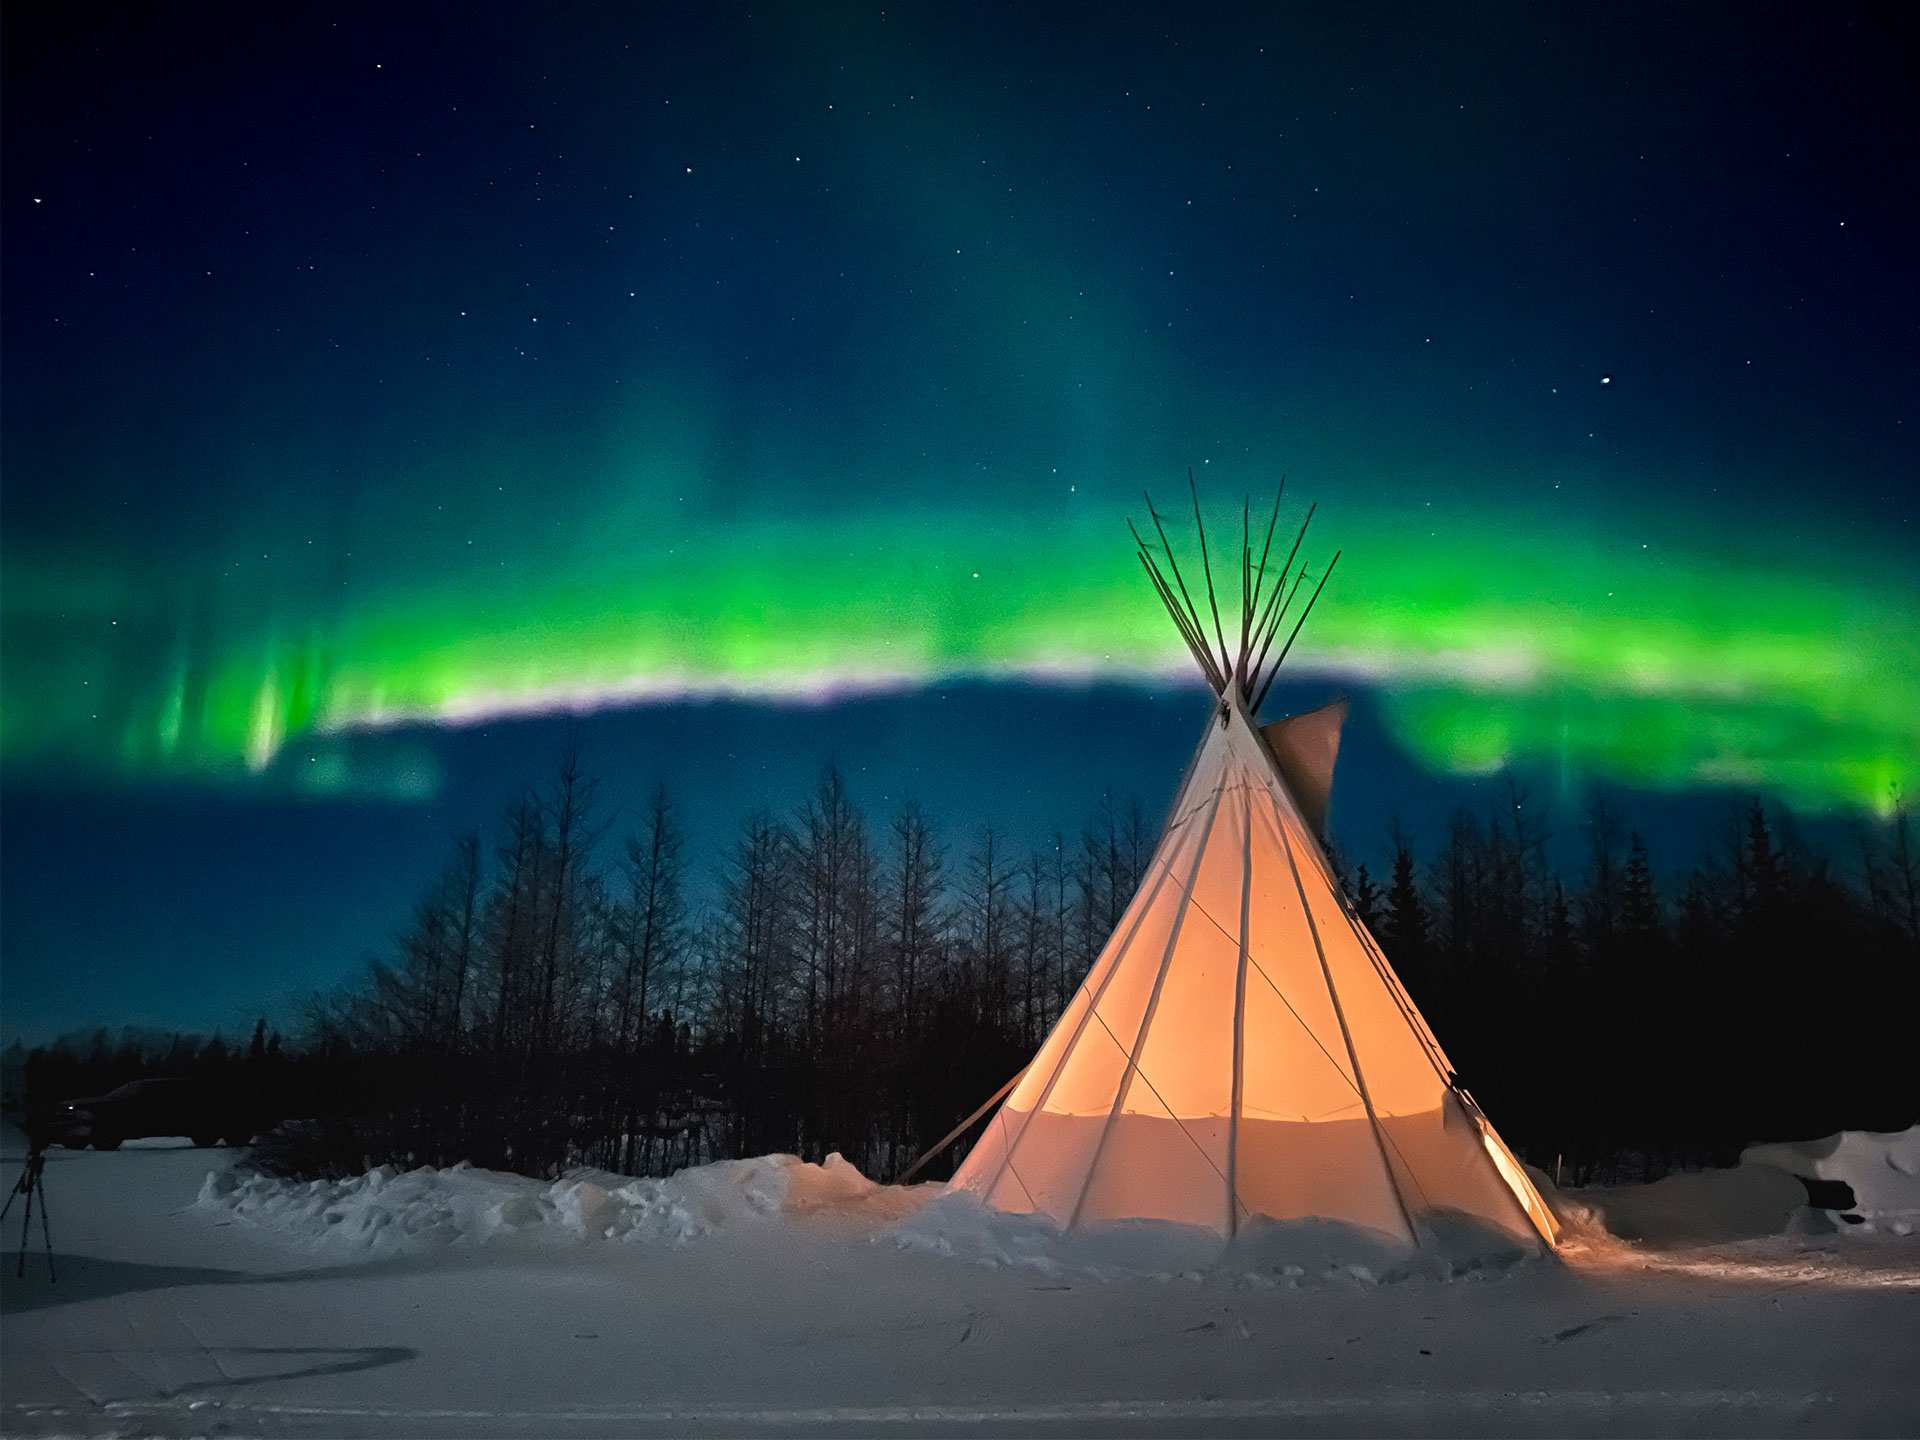 Visit Churchill Manitoba | Viewing the Northern Lights in Teepee Village